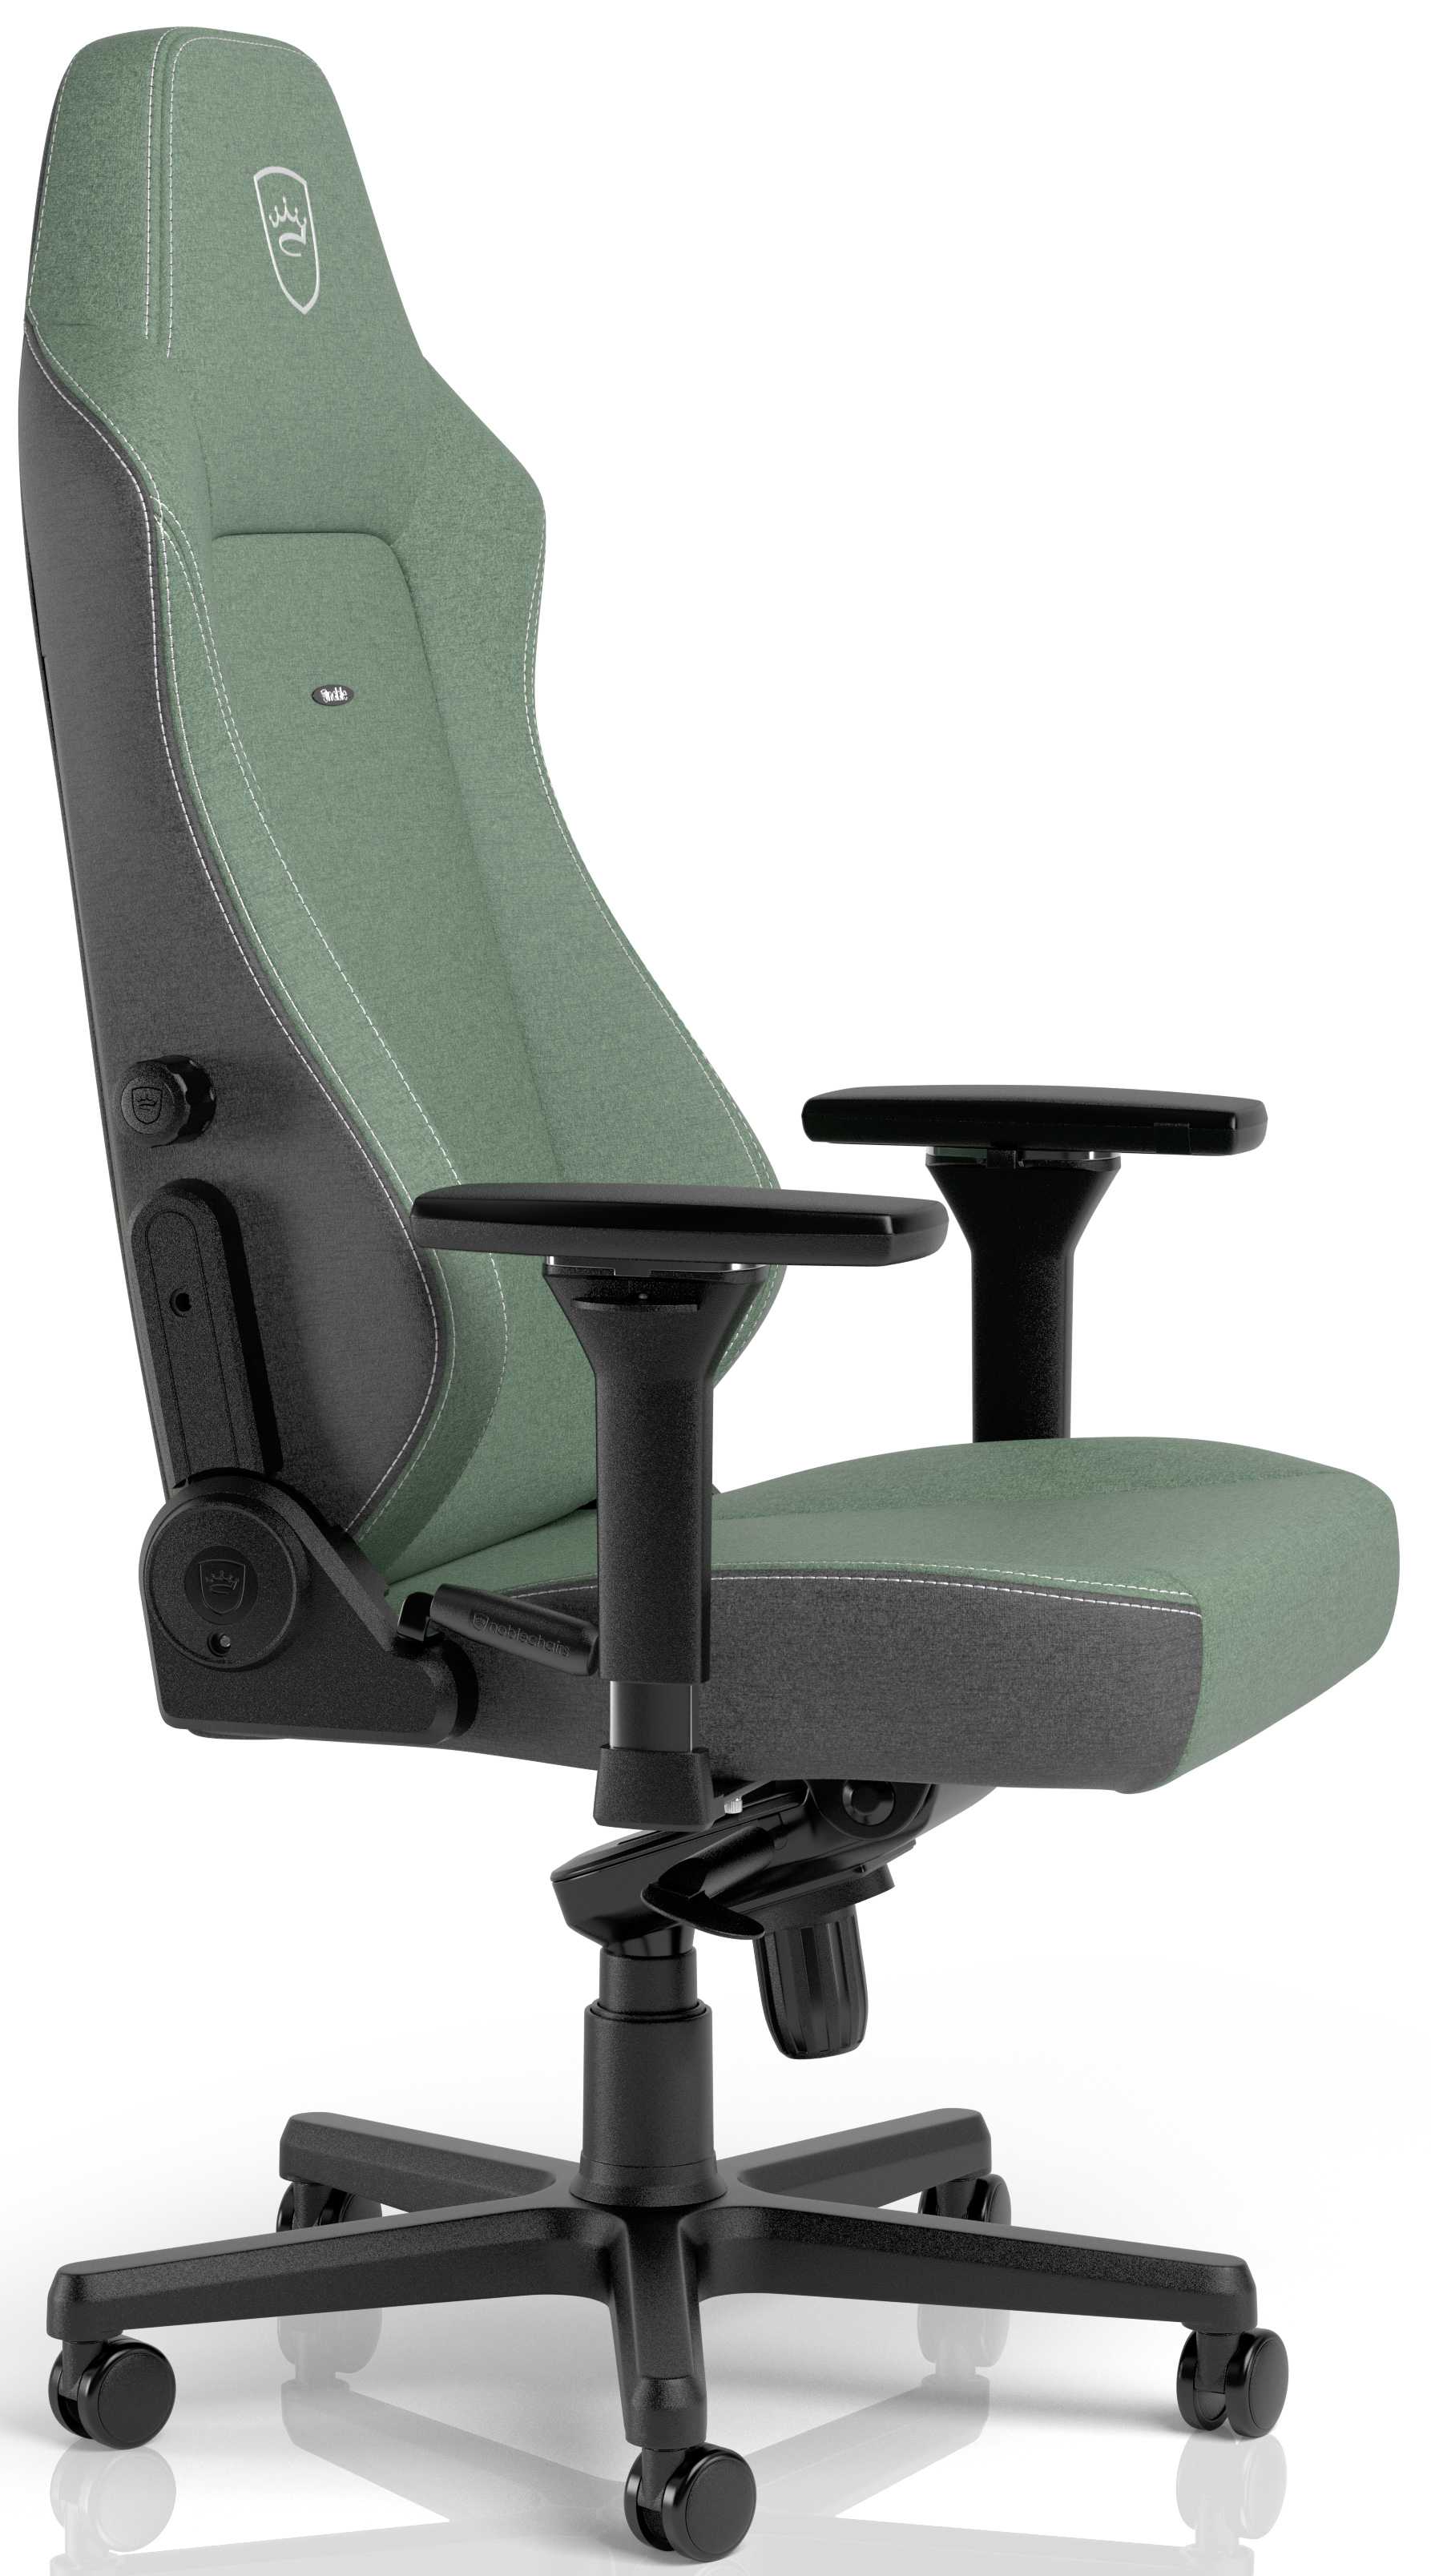 noblechairs - ** B Grade ** Silla noblechairs Hero Two Tone - Green Limited Edition